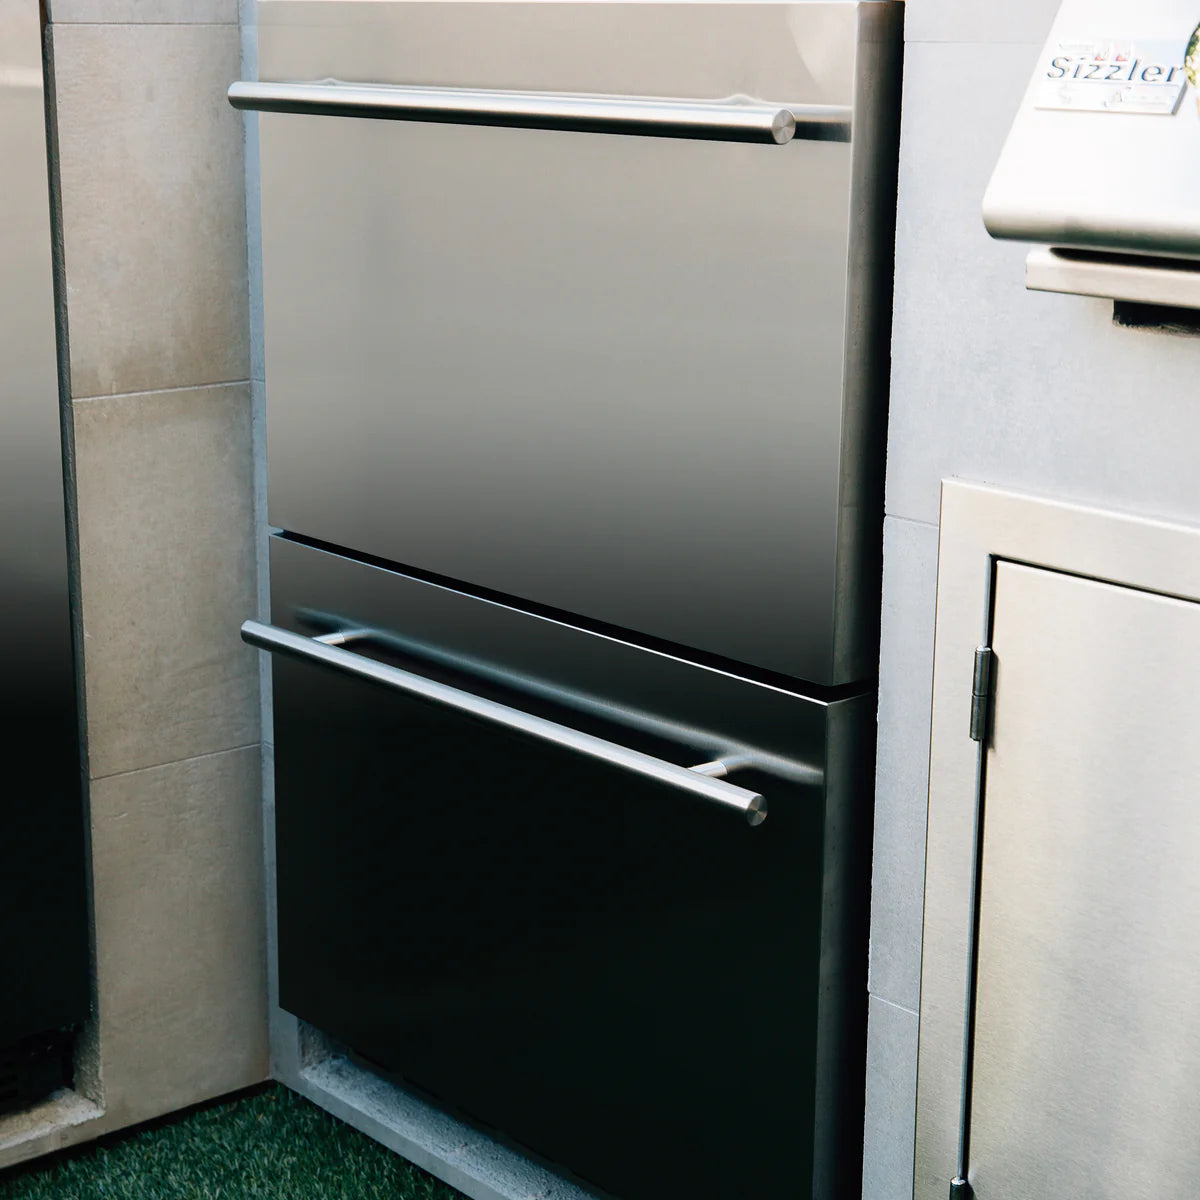 24" 5.3c Deluxe Outdoor Rated 2-Drawer Refrigerator